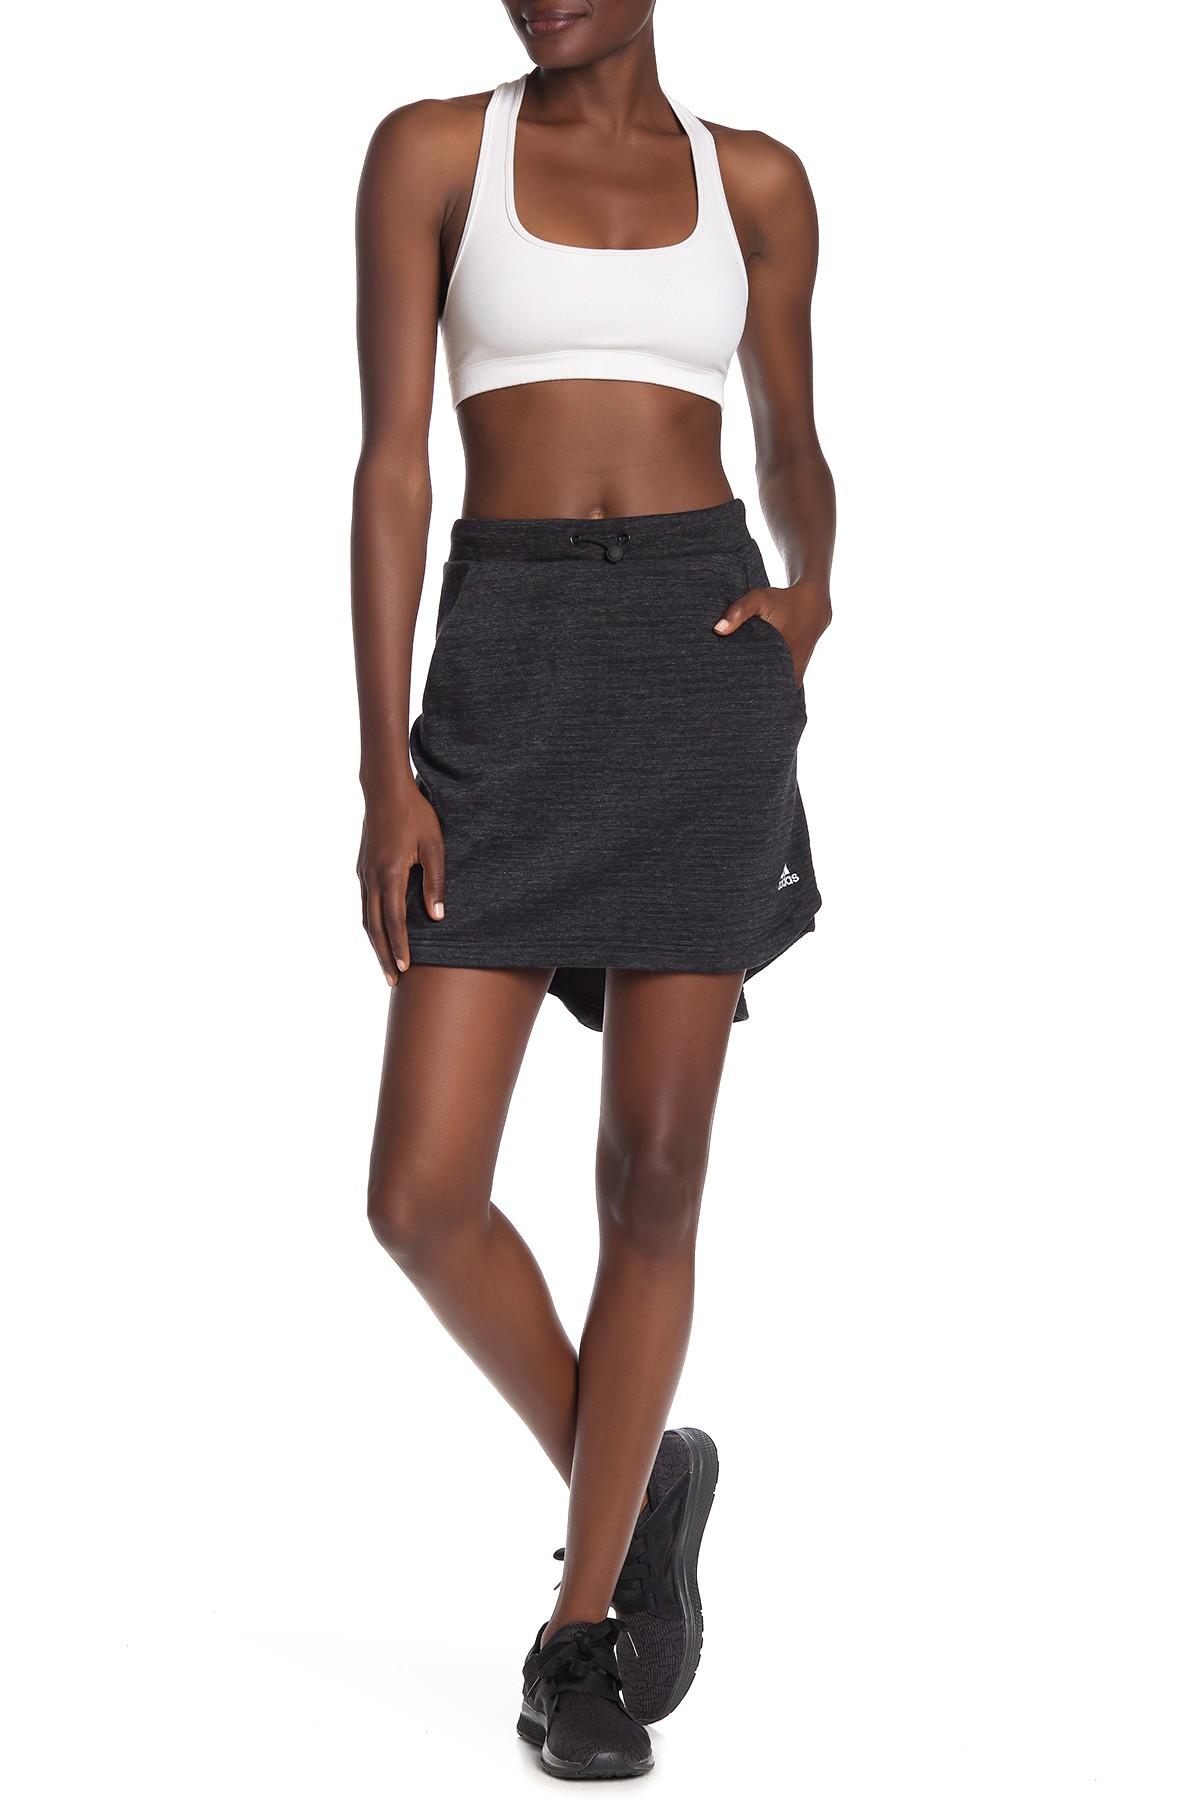 adidas Cotton Heathered French Terry High/low Skirt in Black - Lyst